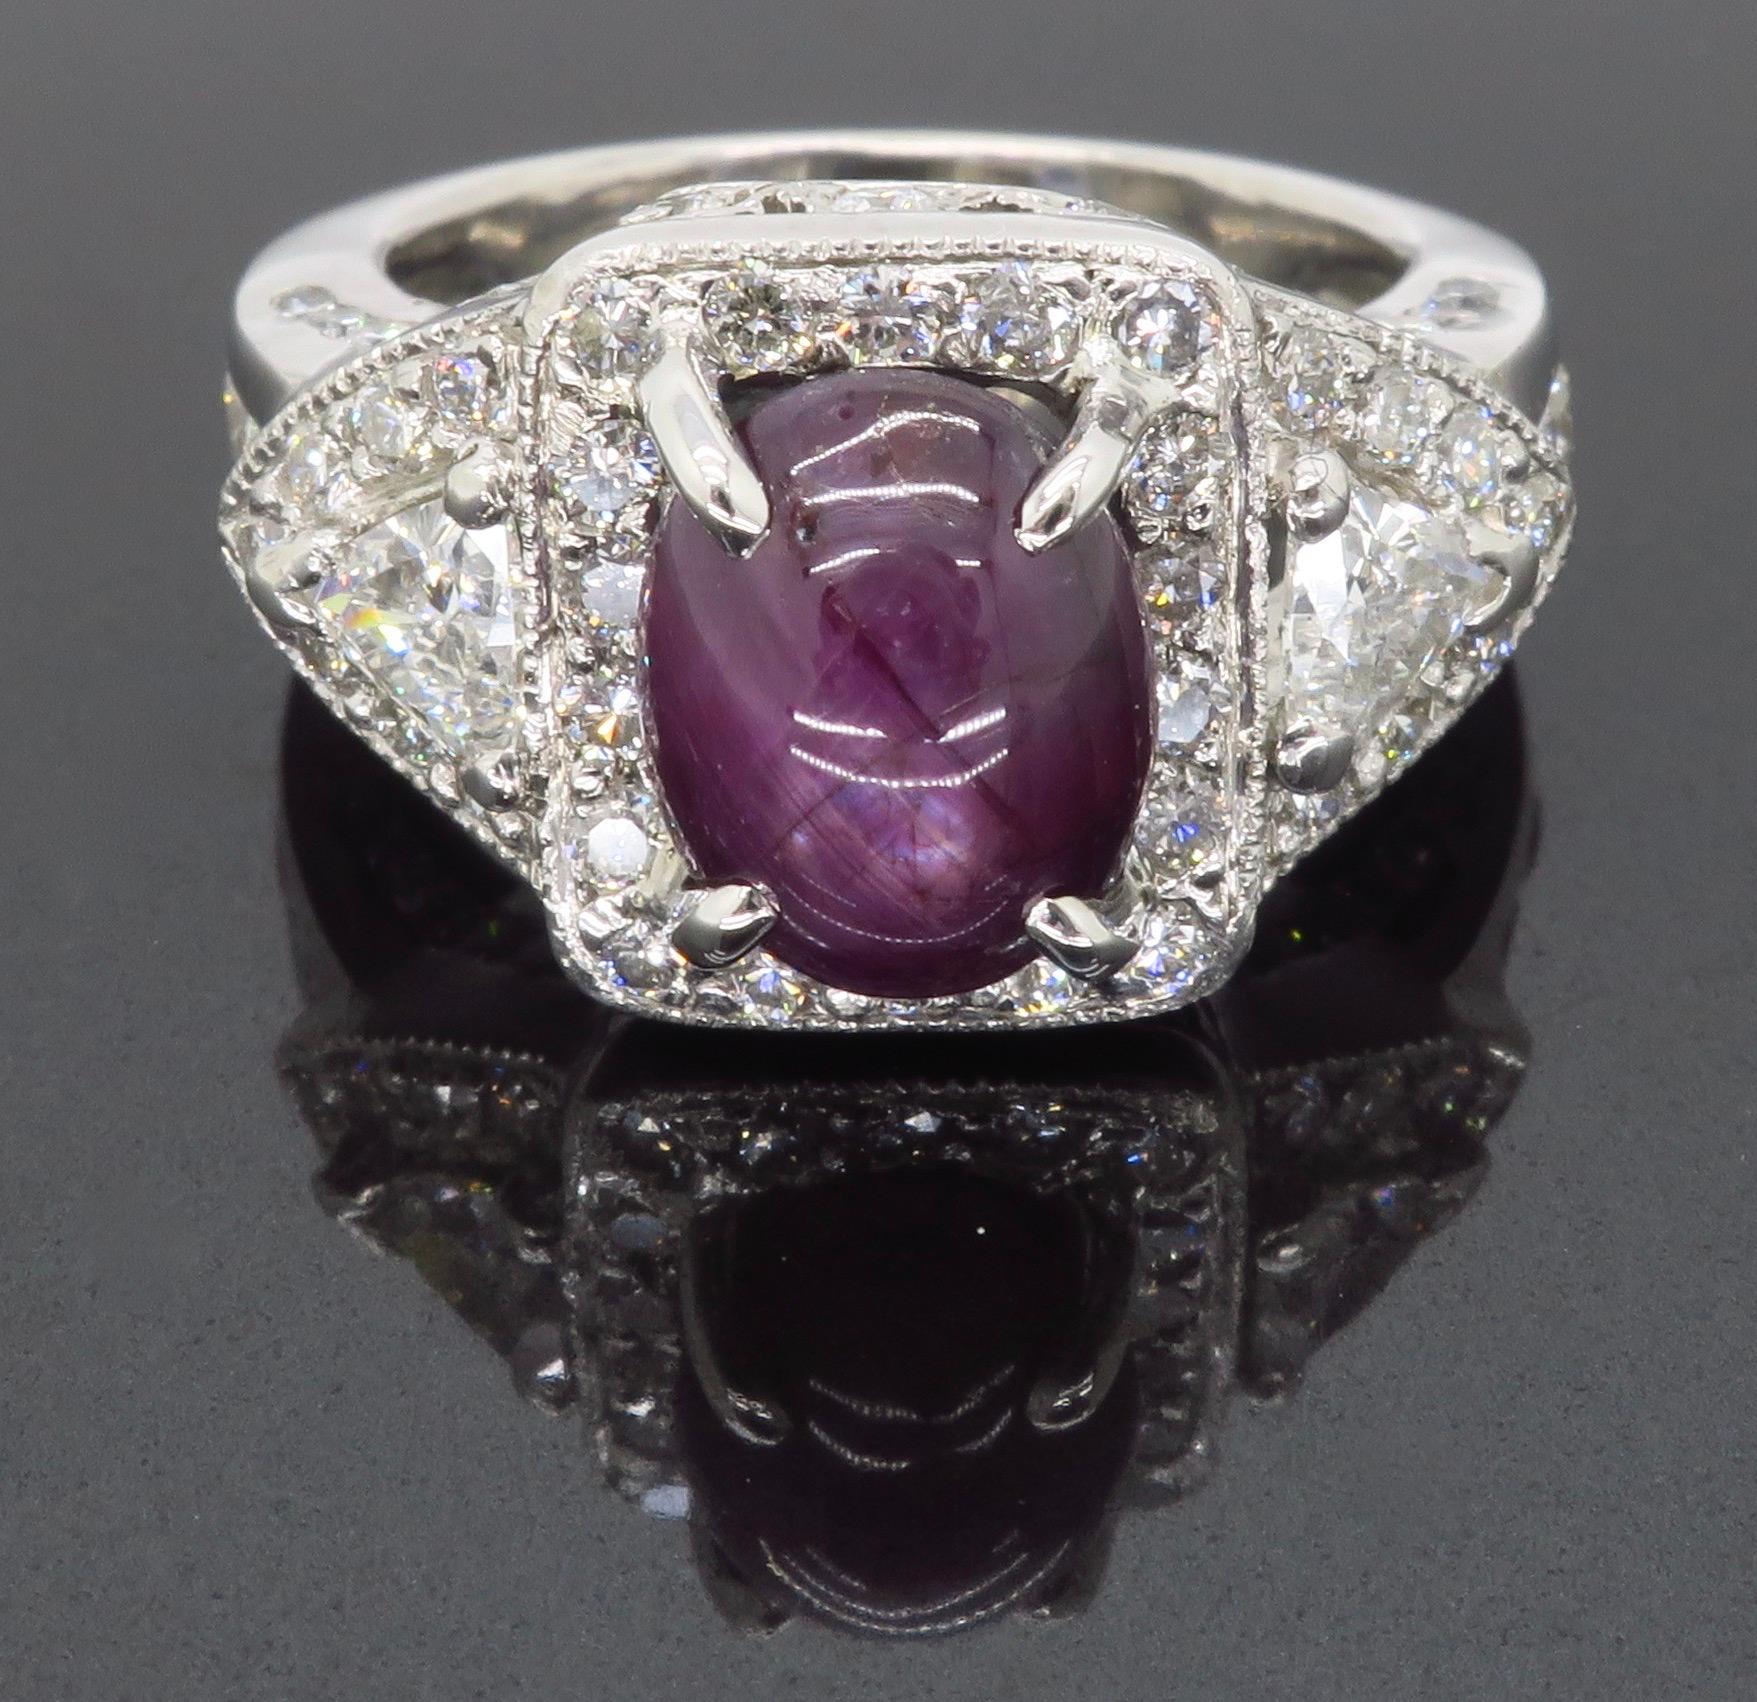 Stunning GIA certified Star Sapphire & Diamond ring made in Platinum 
Gemstone: Ruby & Diamond
Ruby Carat Weight: 4.38ct 
GIA Certification number: 2205925253
Diamond Carat Weight:  Approximately 1.51CTW
Average Color: F-G
Average Clarity: